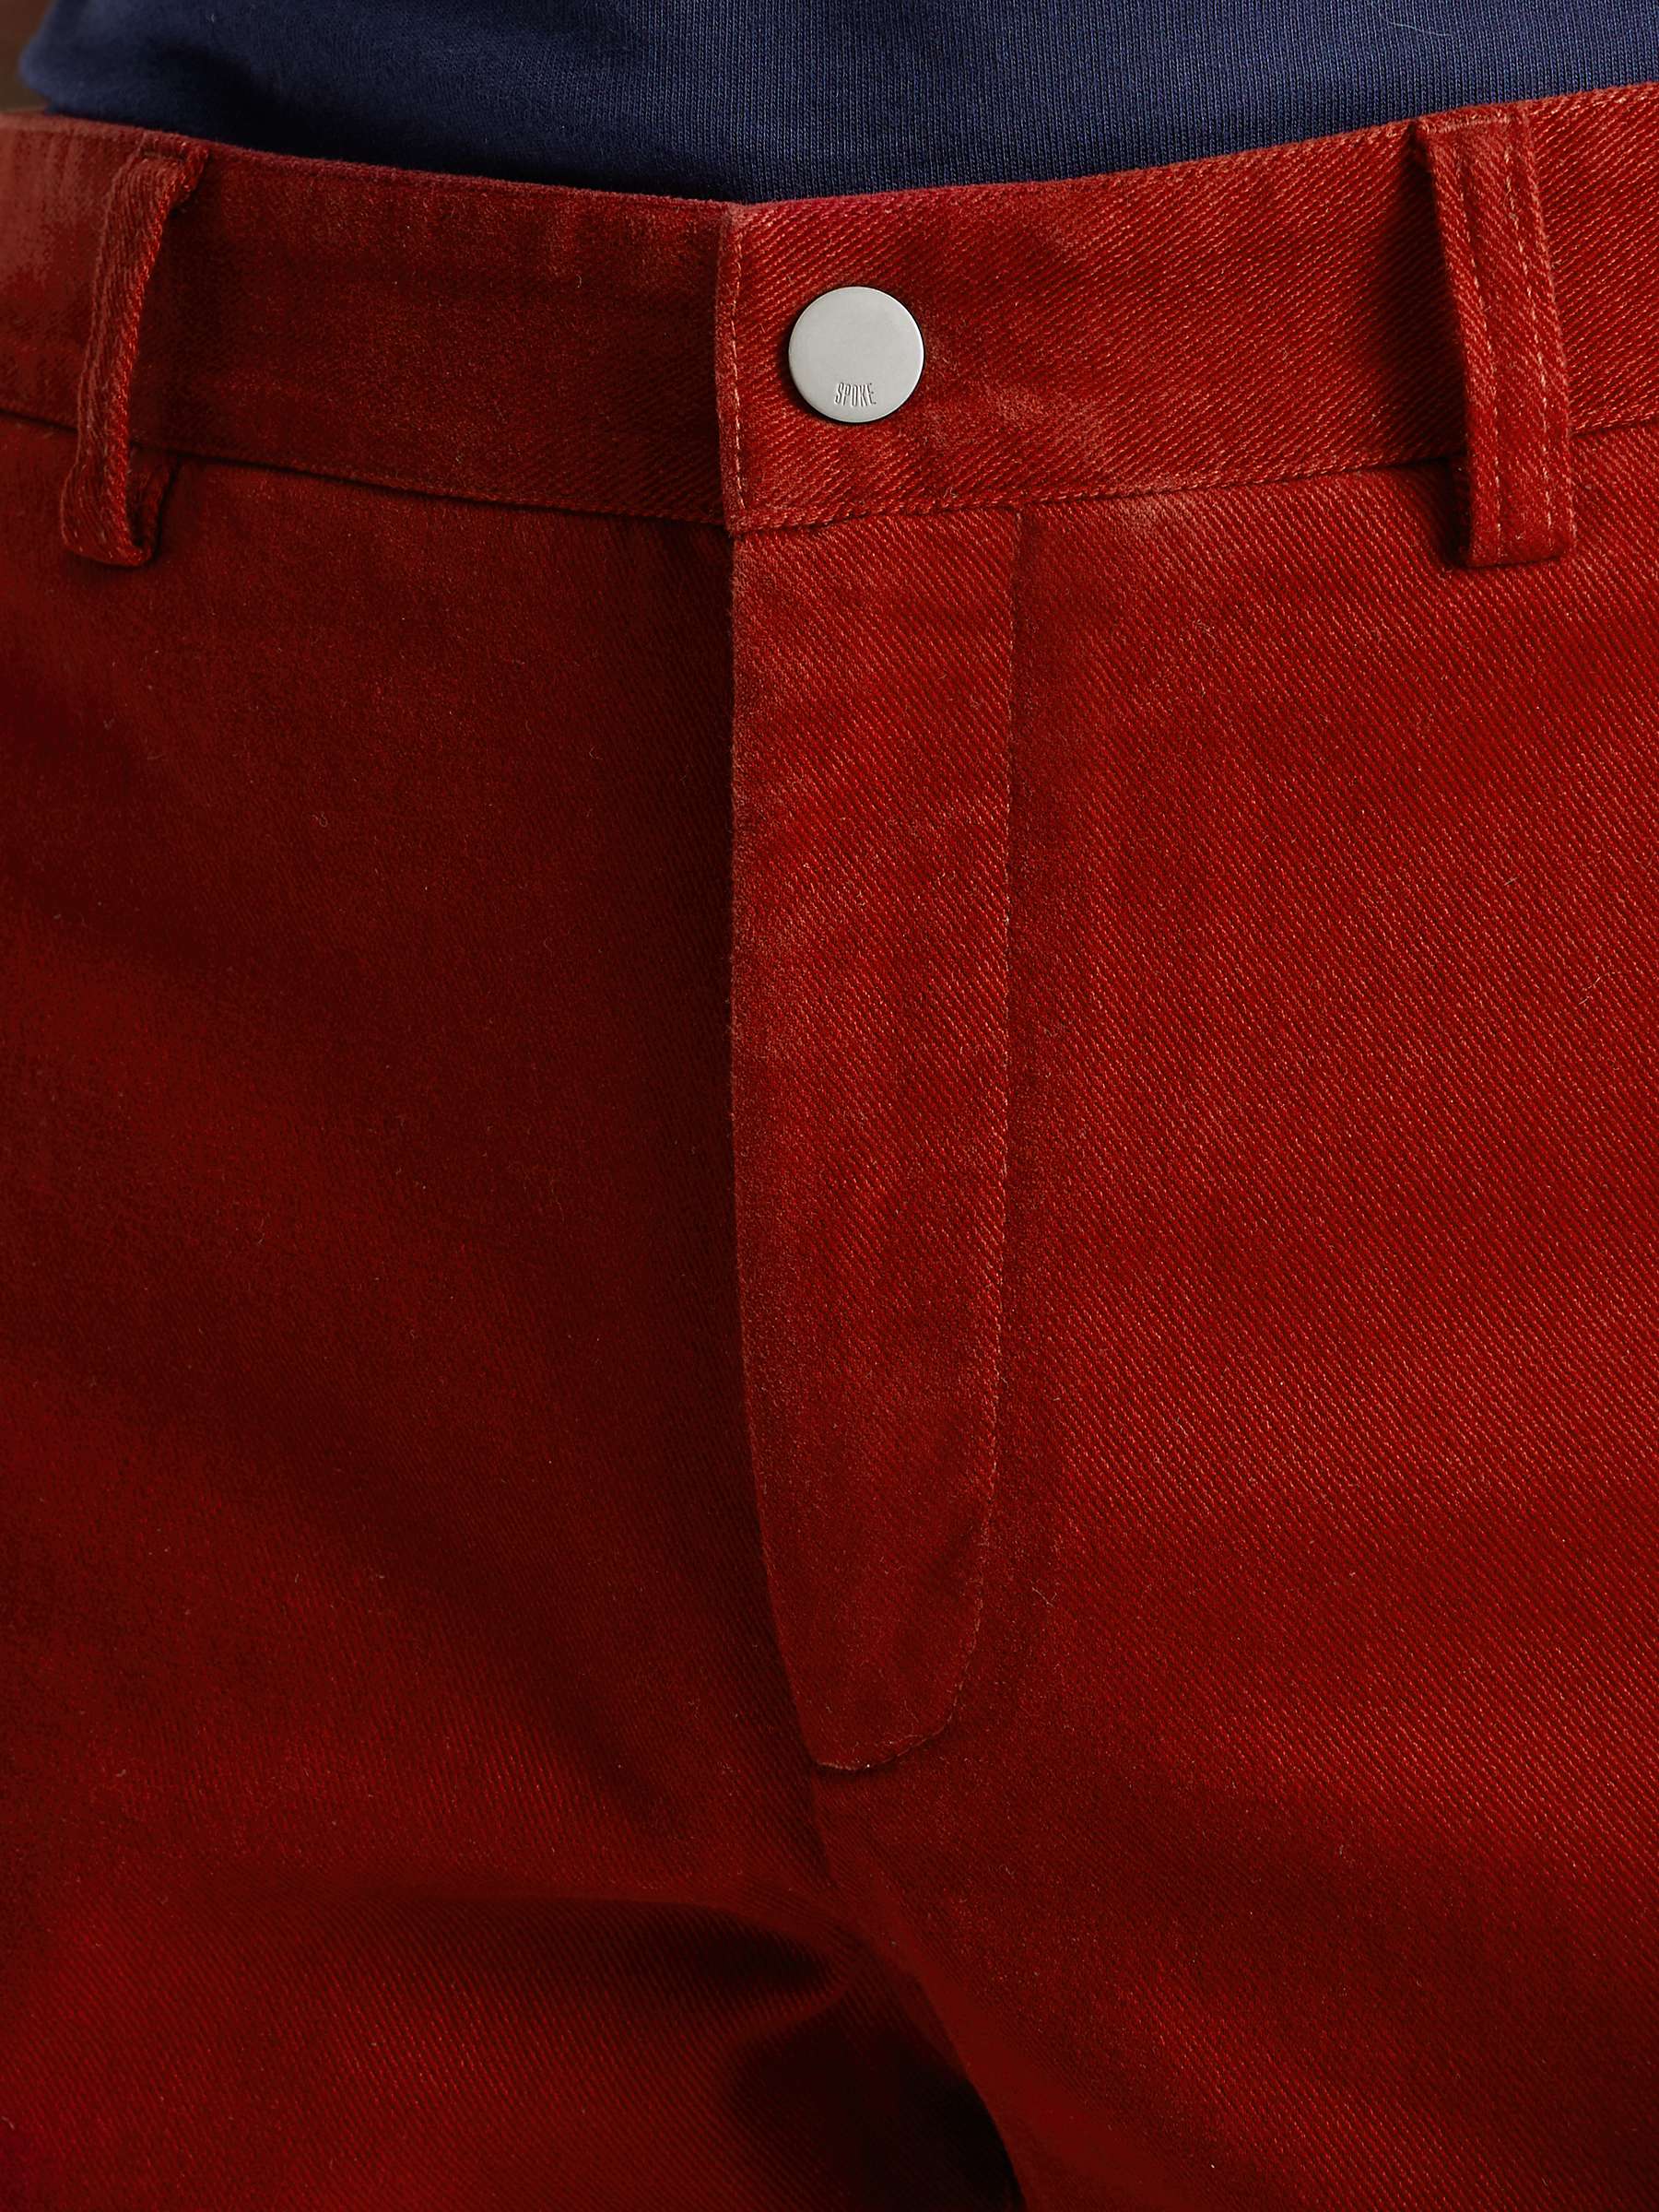 Buy SPOKE Winter Heroes Cotton Blend Broad Thigh Chinos, Maroon Online at johnlewis.com